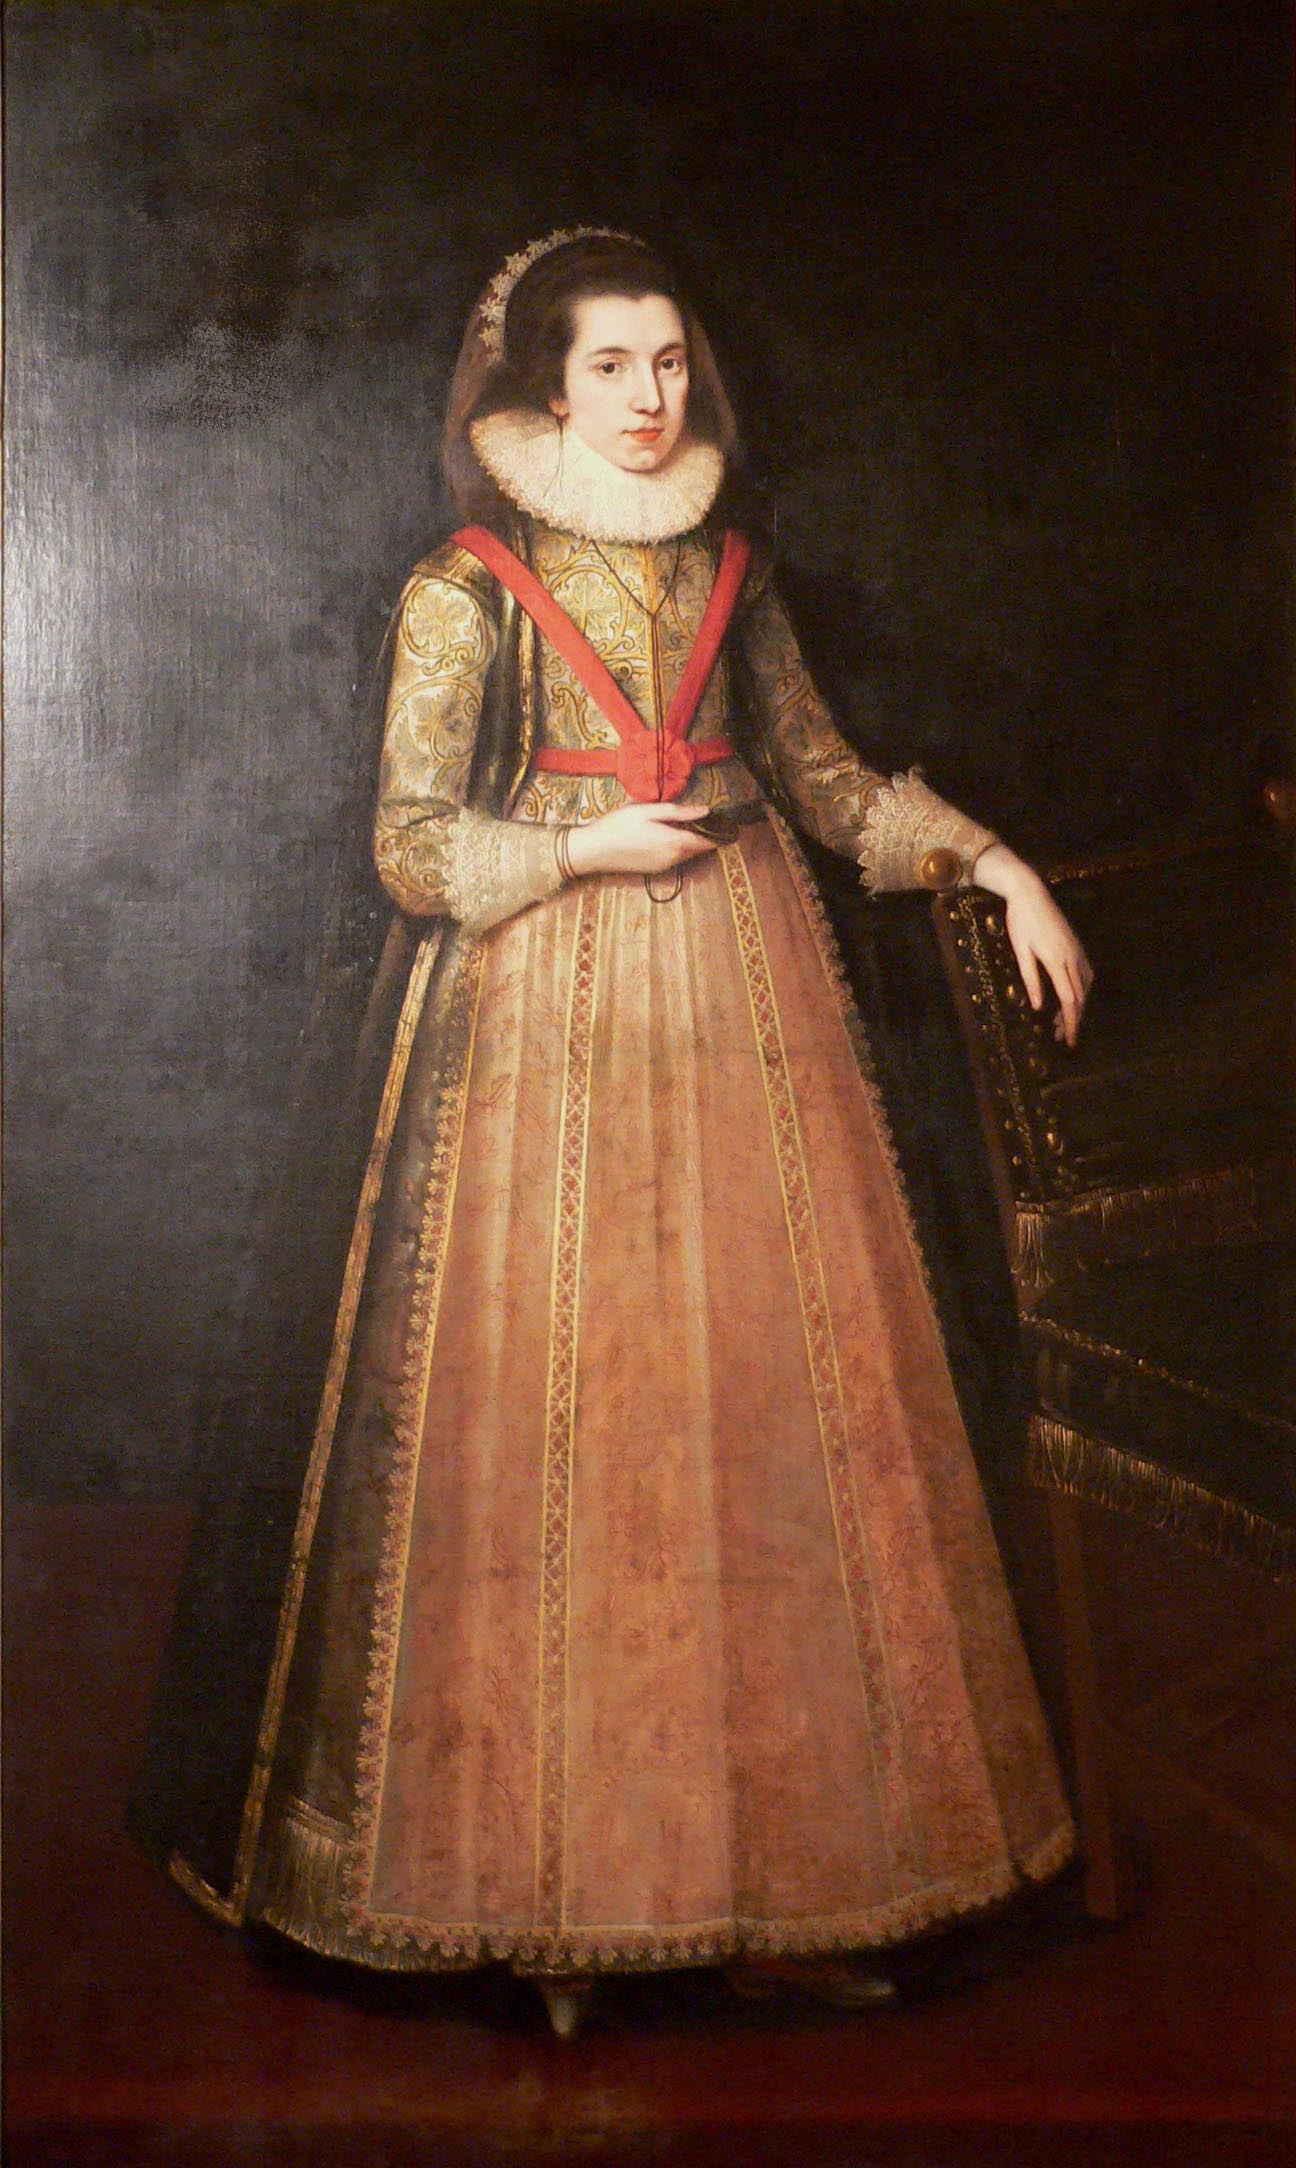 Portrait of Lady Anne Clifford by an unknown artist, courtesy of a private collection